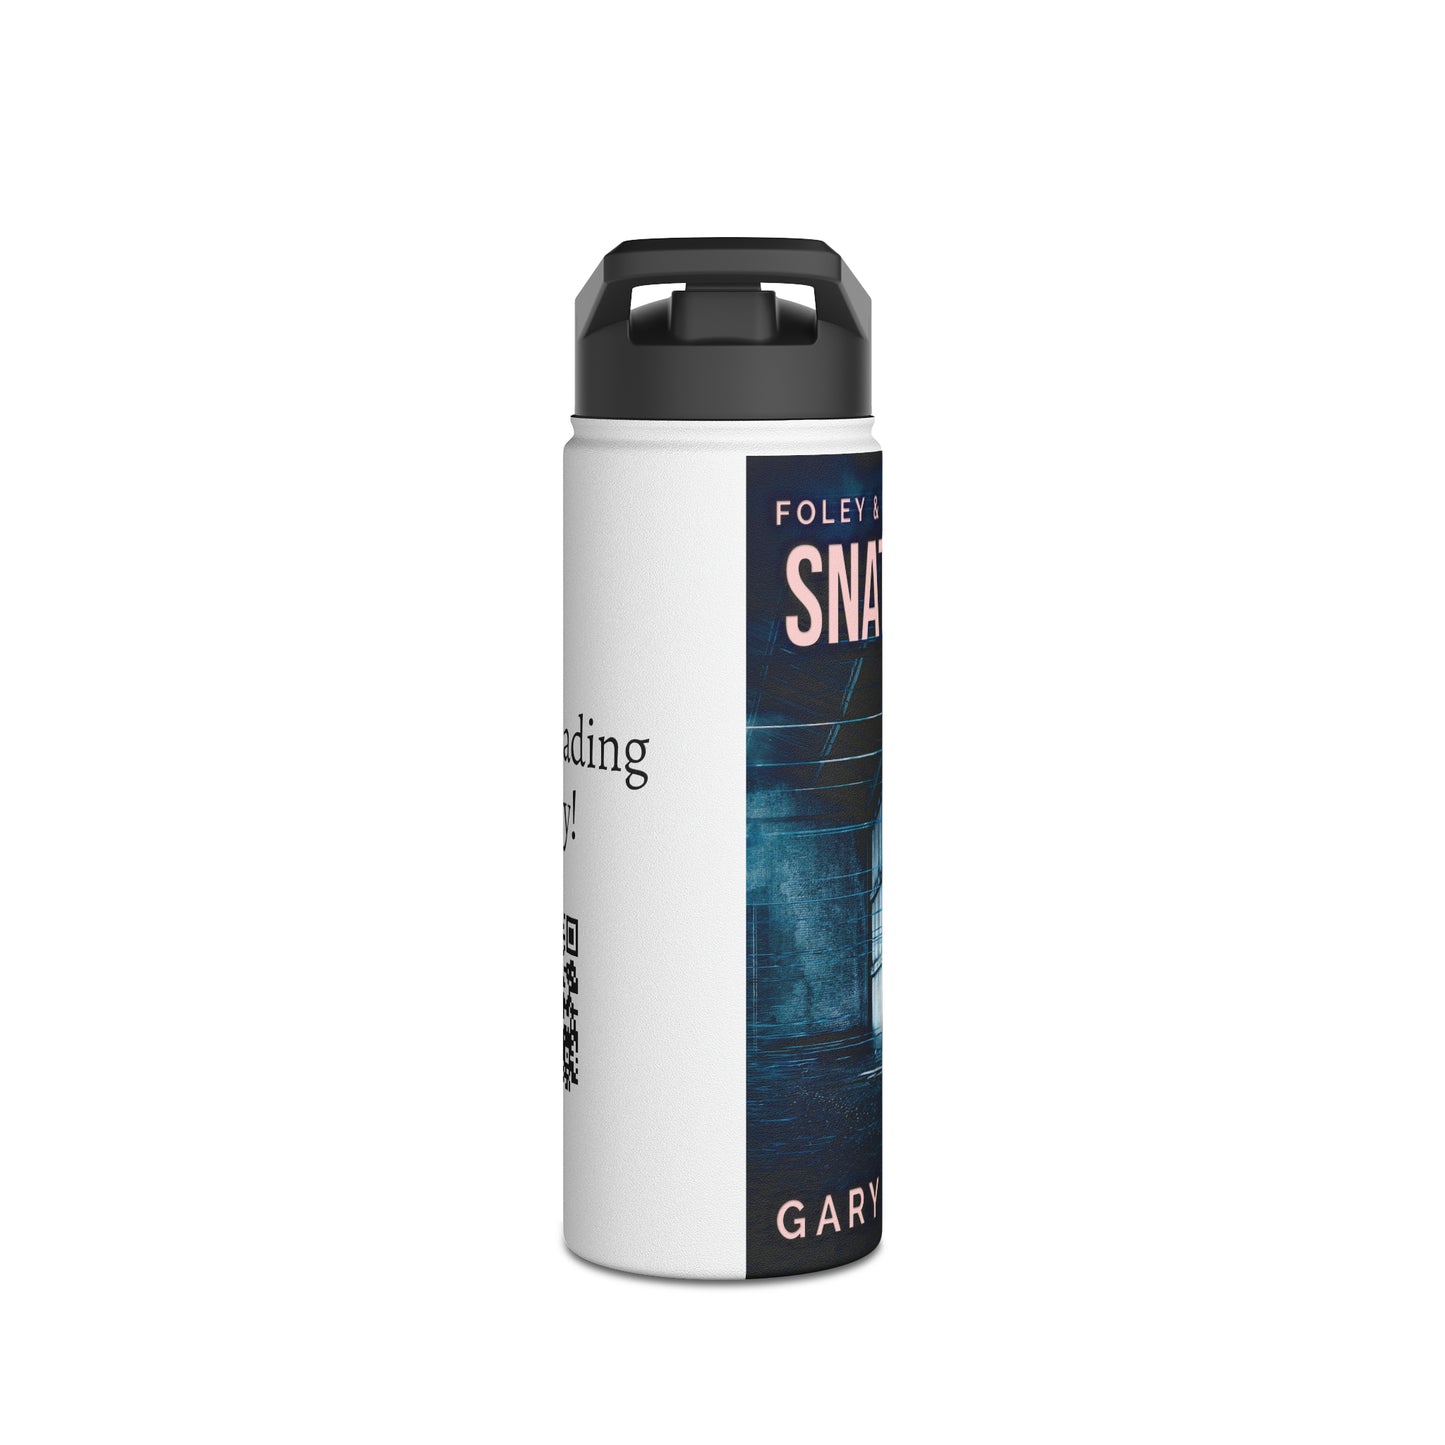 Snatched! - Stainless Steel Water Bottle